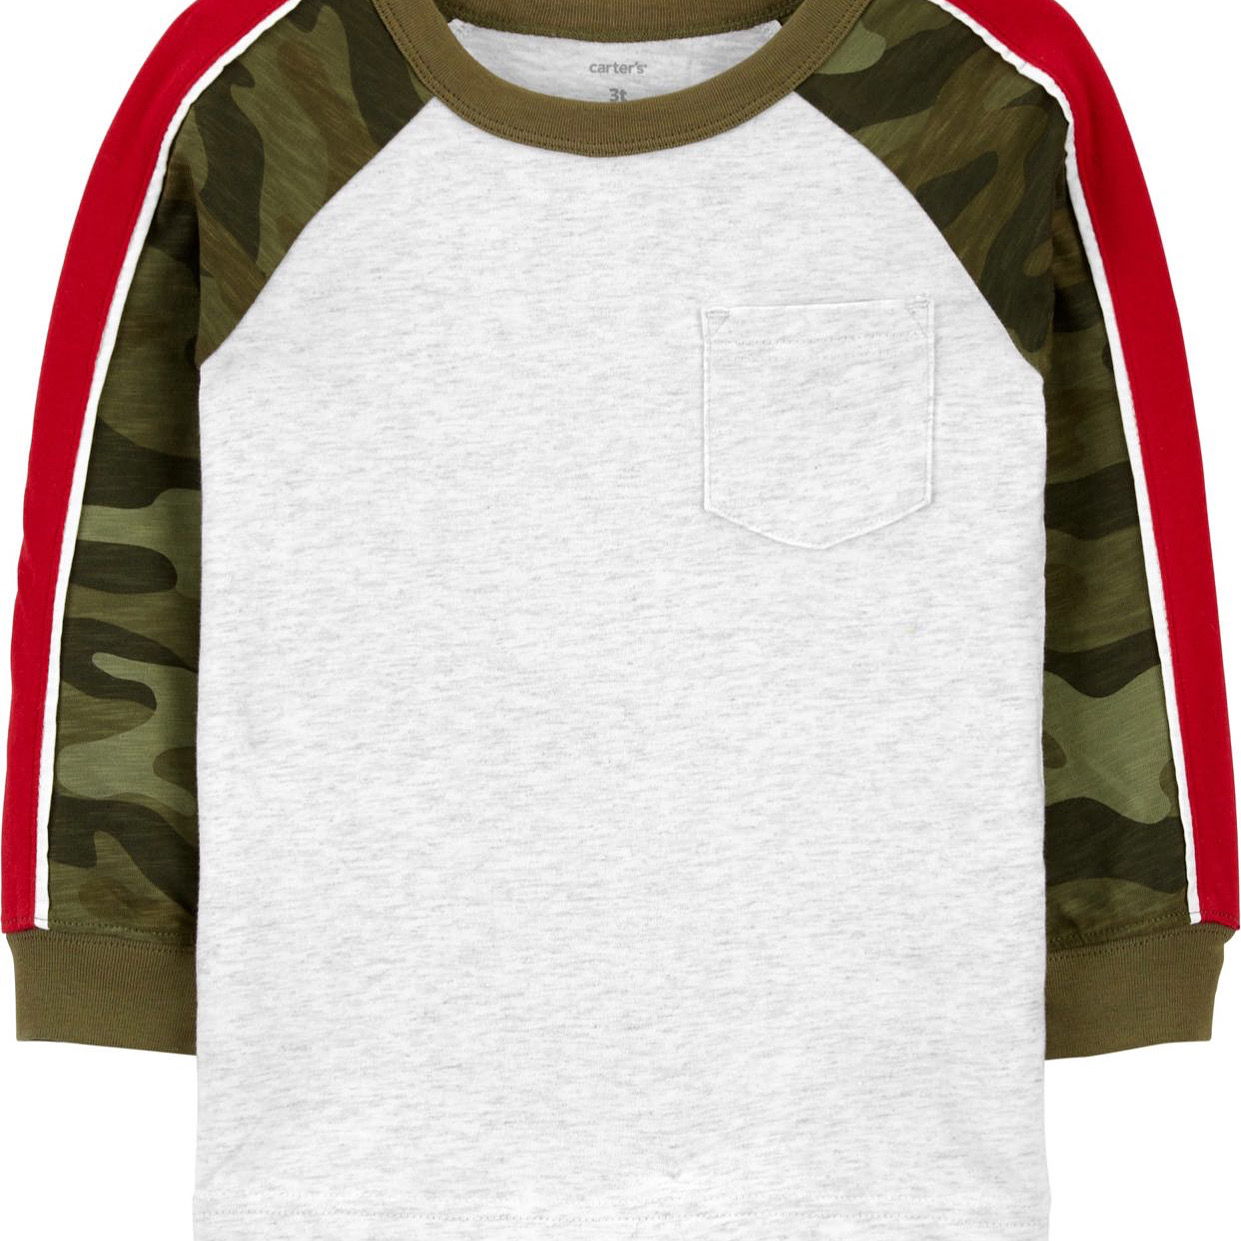 18-24 months Camouflage tee